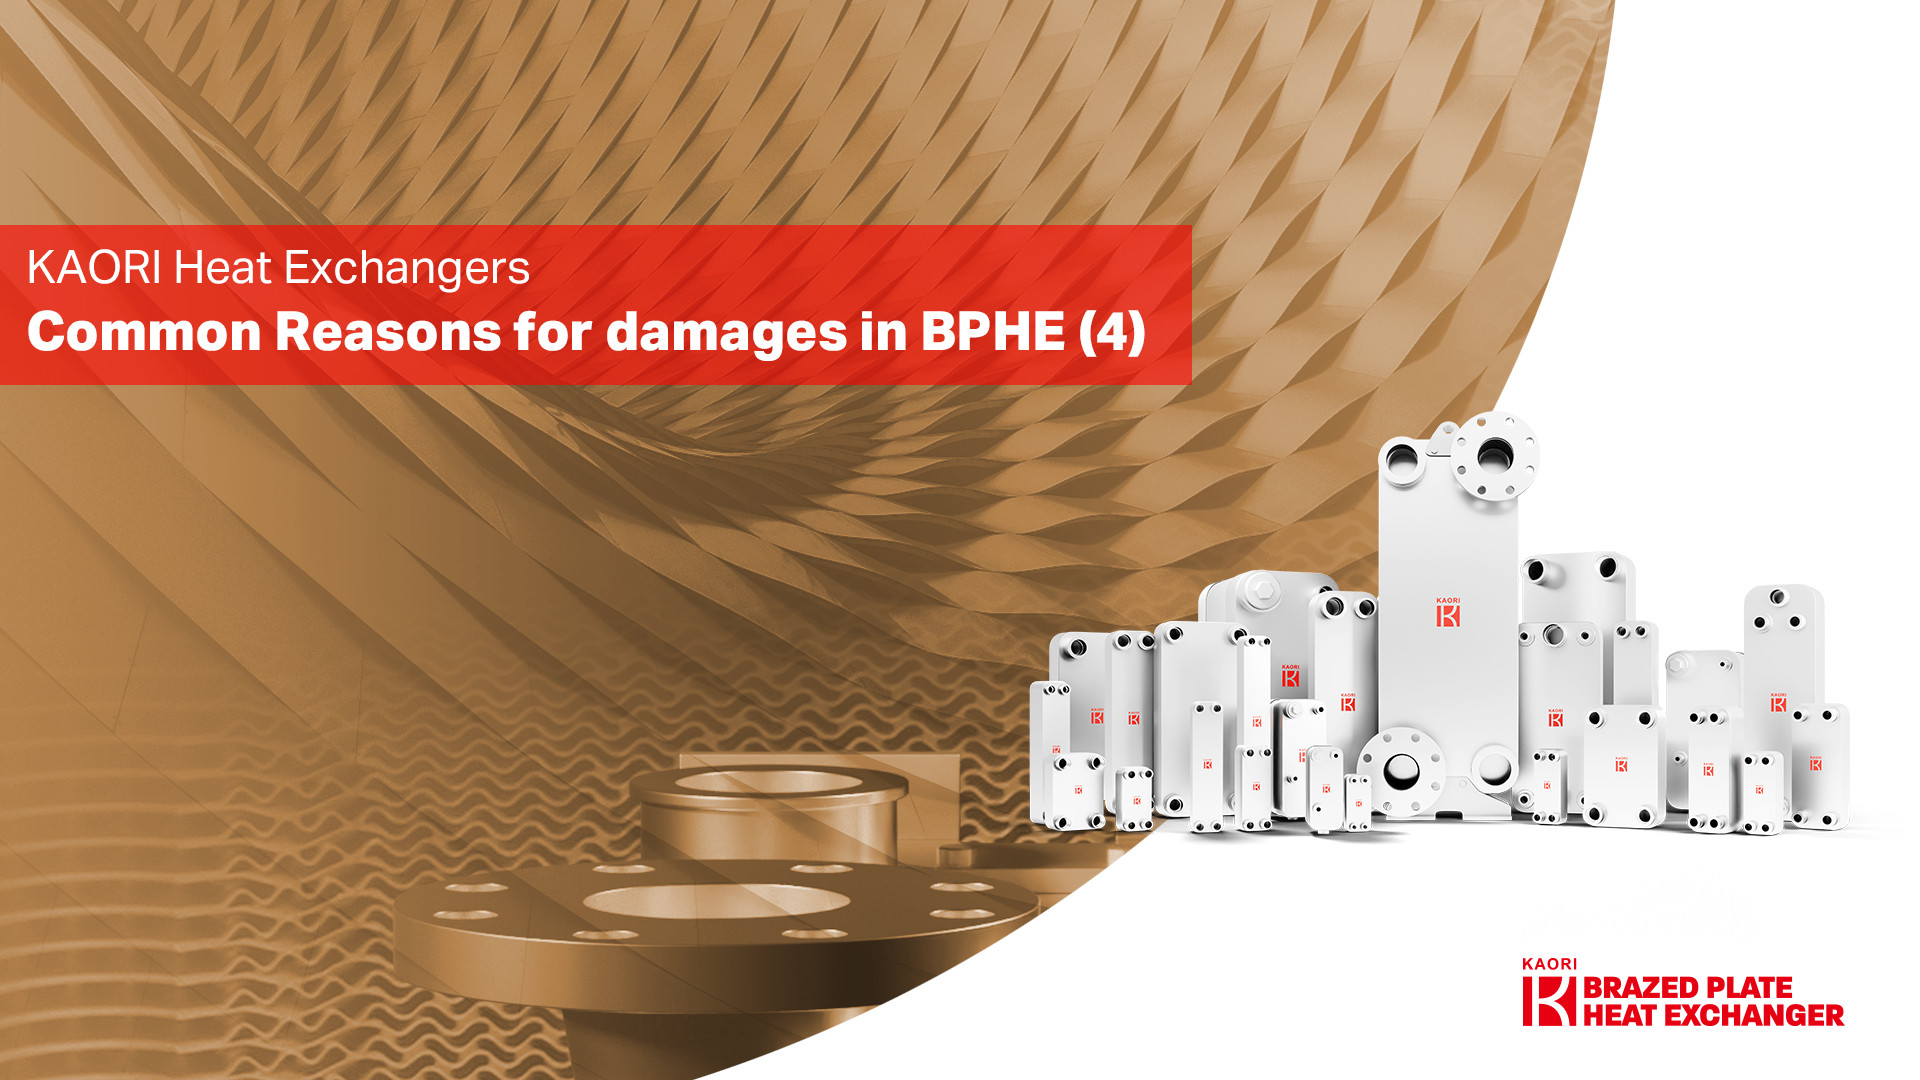  Common Reasons for Damages in BPHEs- (4) Stress 